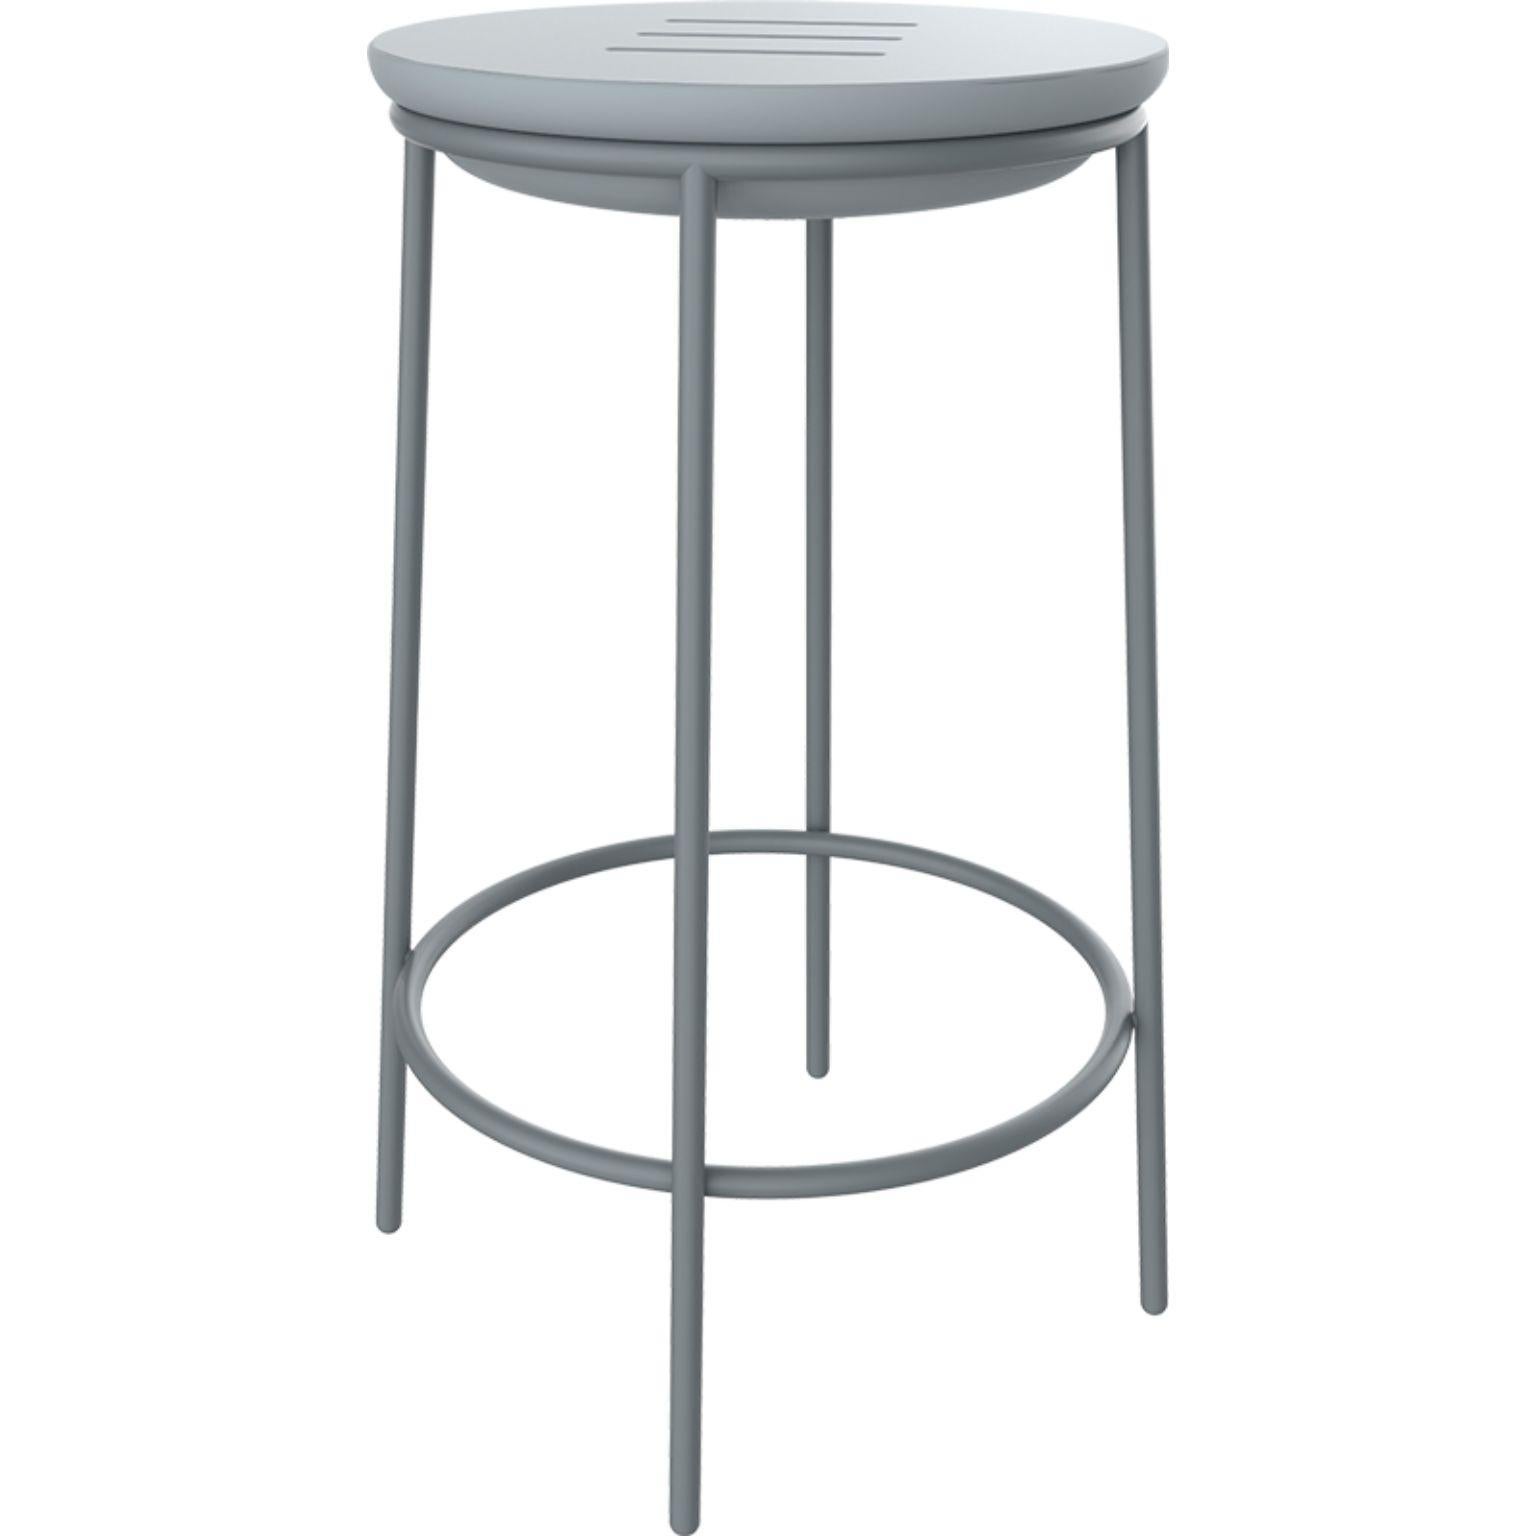 Lace grey 60 High table by MOWEE
Dimensions: D75 x H111 cm
Material: Polyethylene and stainless steel
Weight: 10.5 kg
Also available in different colors and finishes. 

Lace is a collection of furniture made by rotomoulding. Its shape